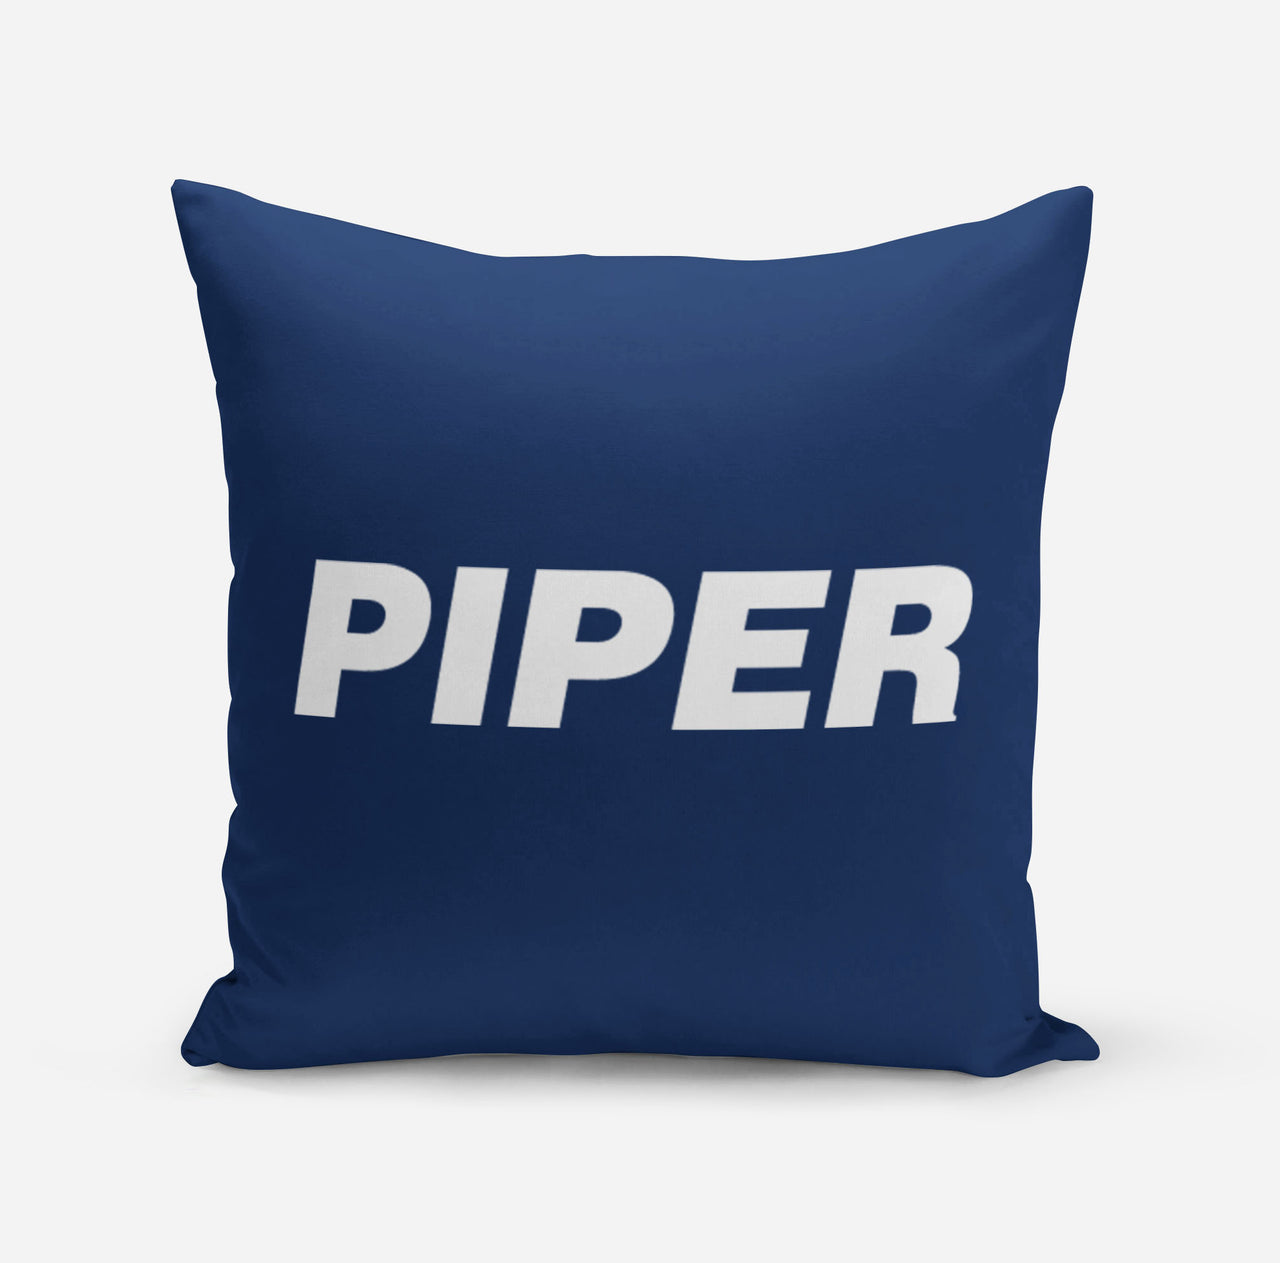 Piper & Text Designed Pillows